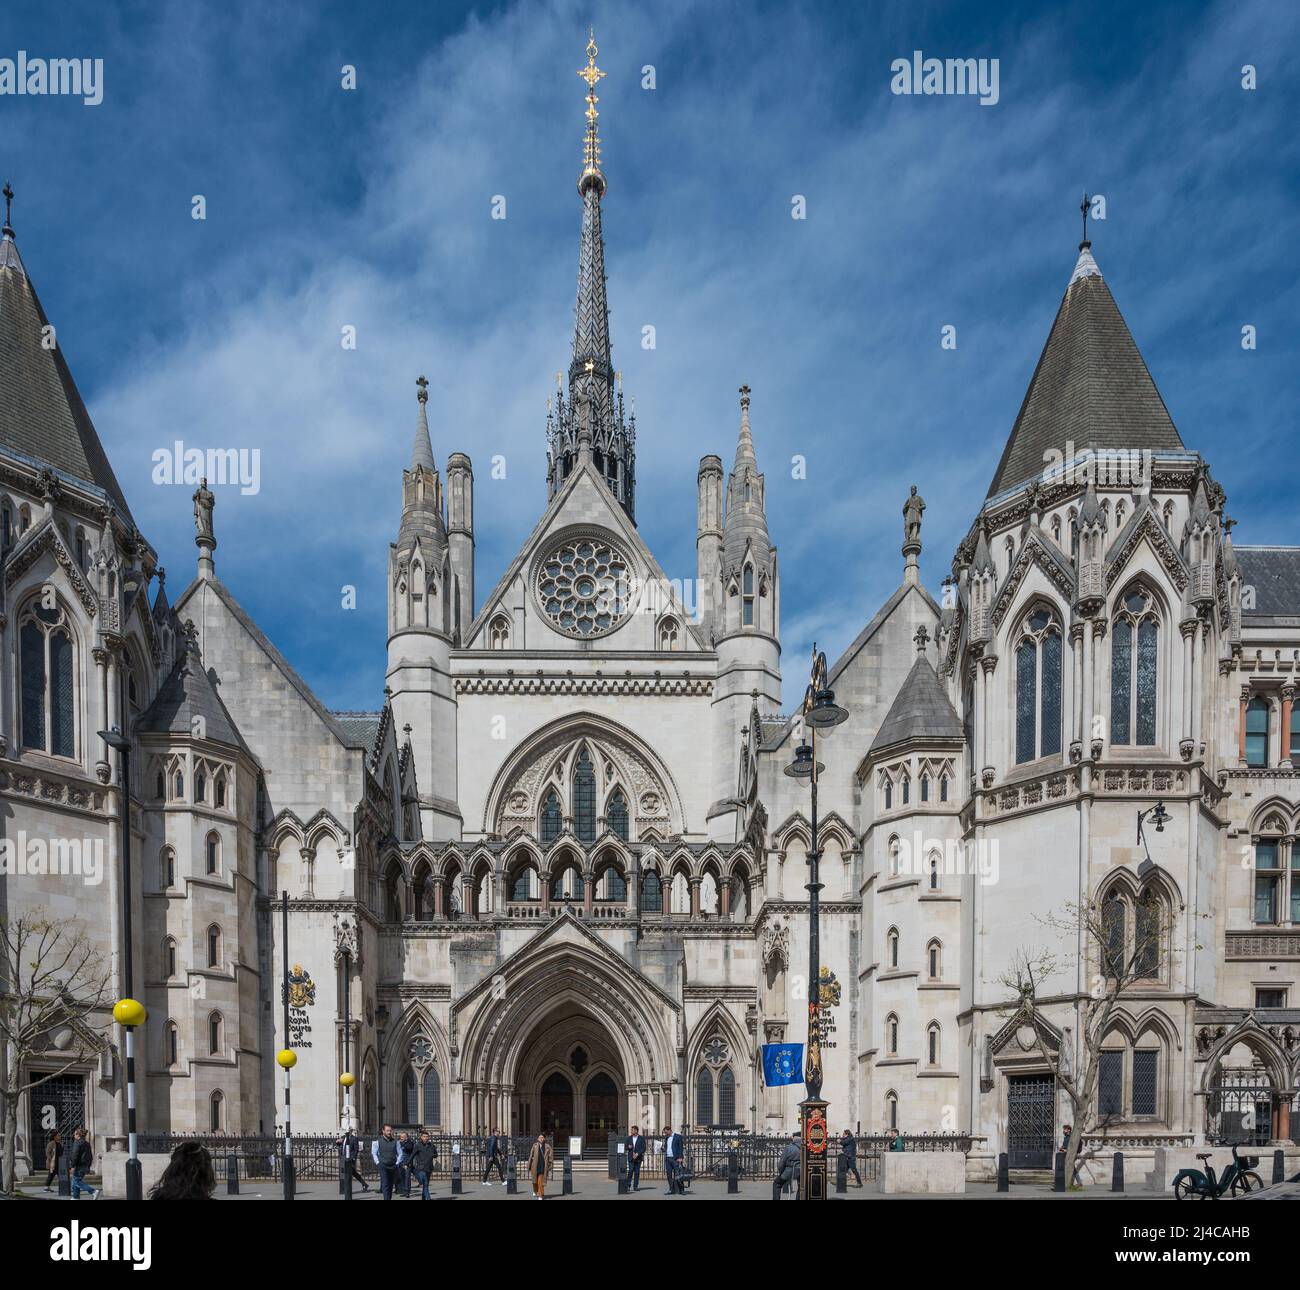 People coming and going at the Royal Courts of Justice. Strand, London, England, UK. Stock Photo